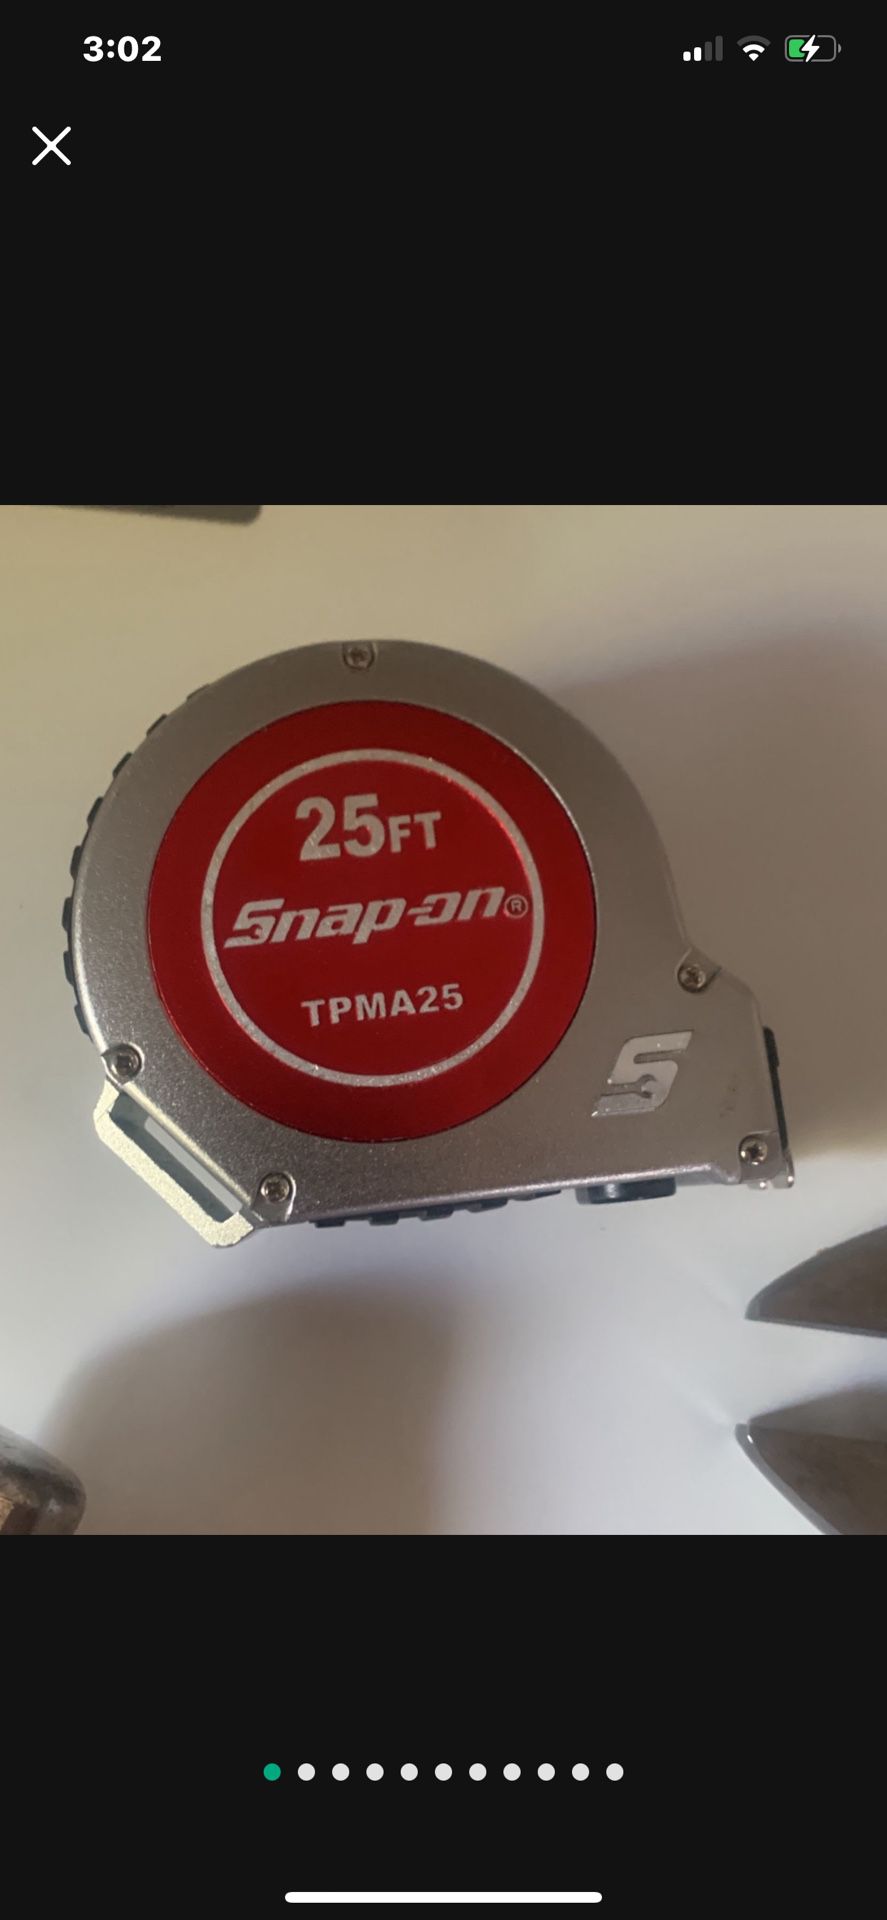 Snap On.        25ft